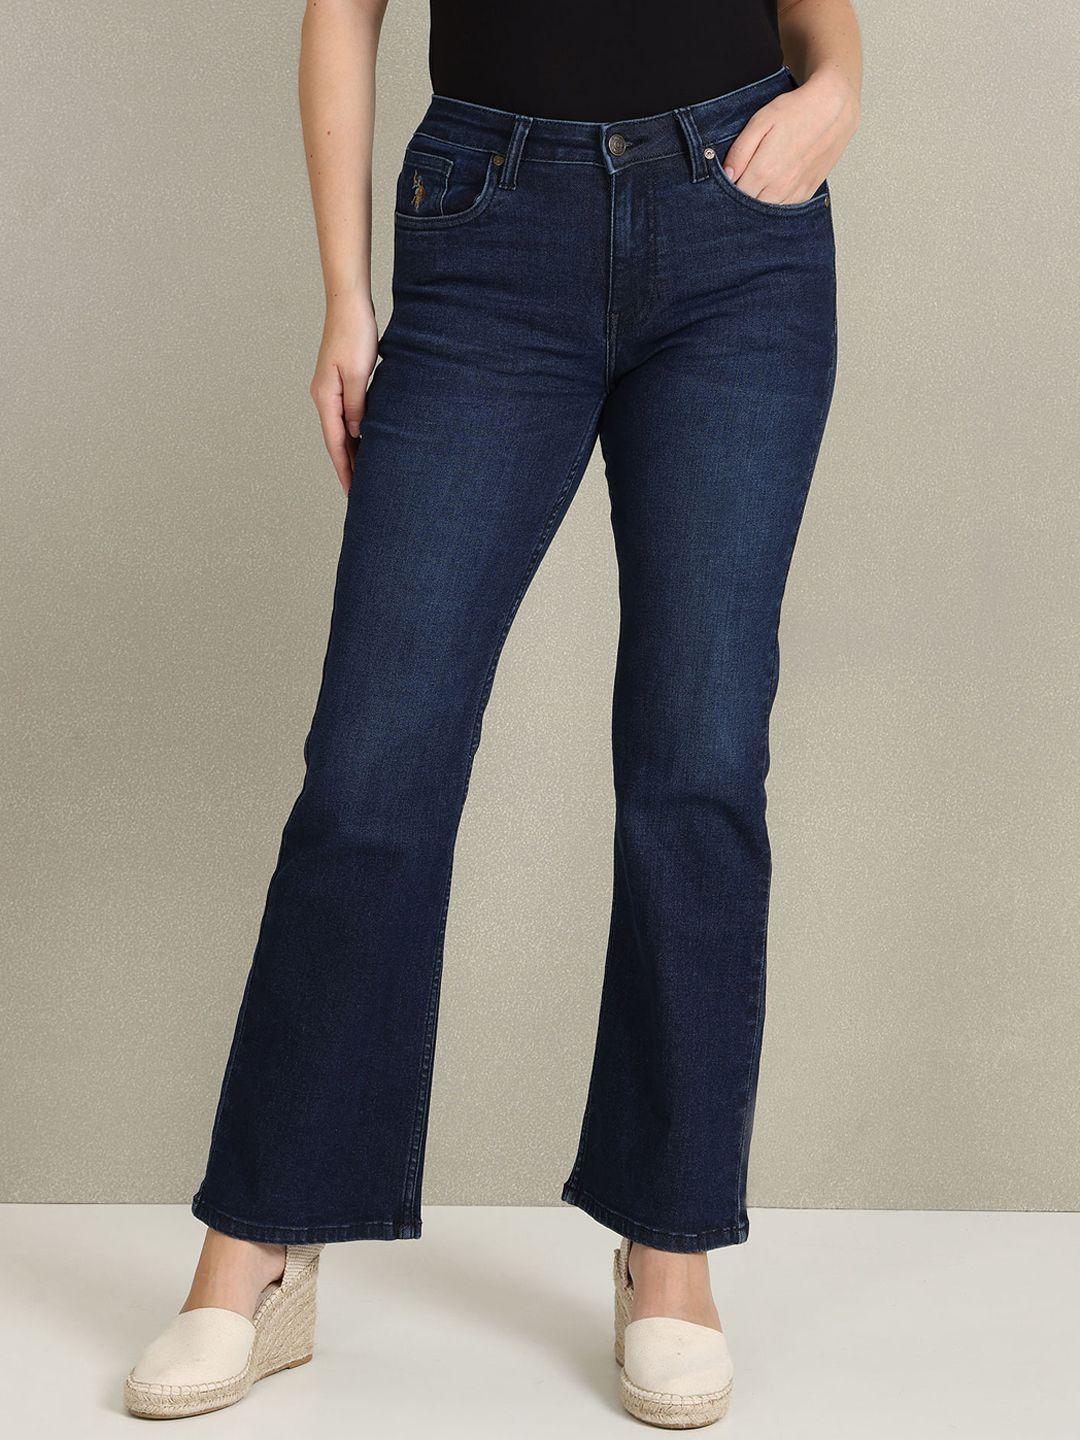 u.s. polo assn. women mid rise bootcut clean look stretchable jeans